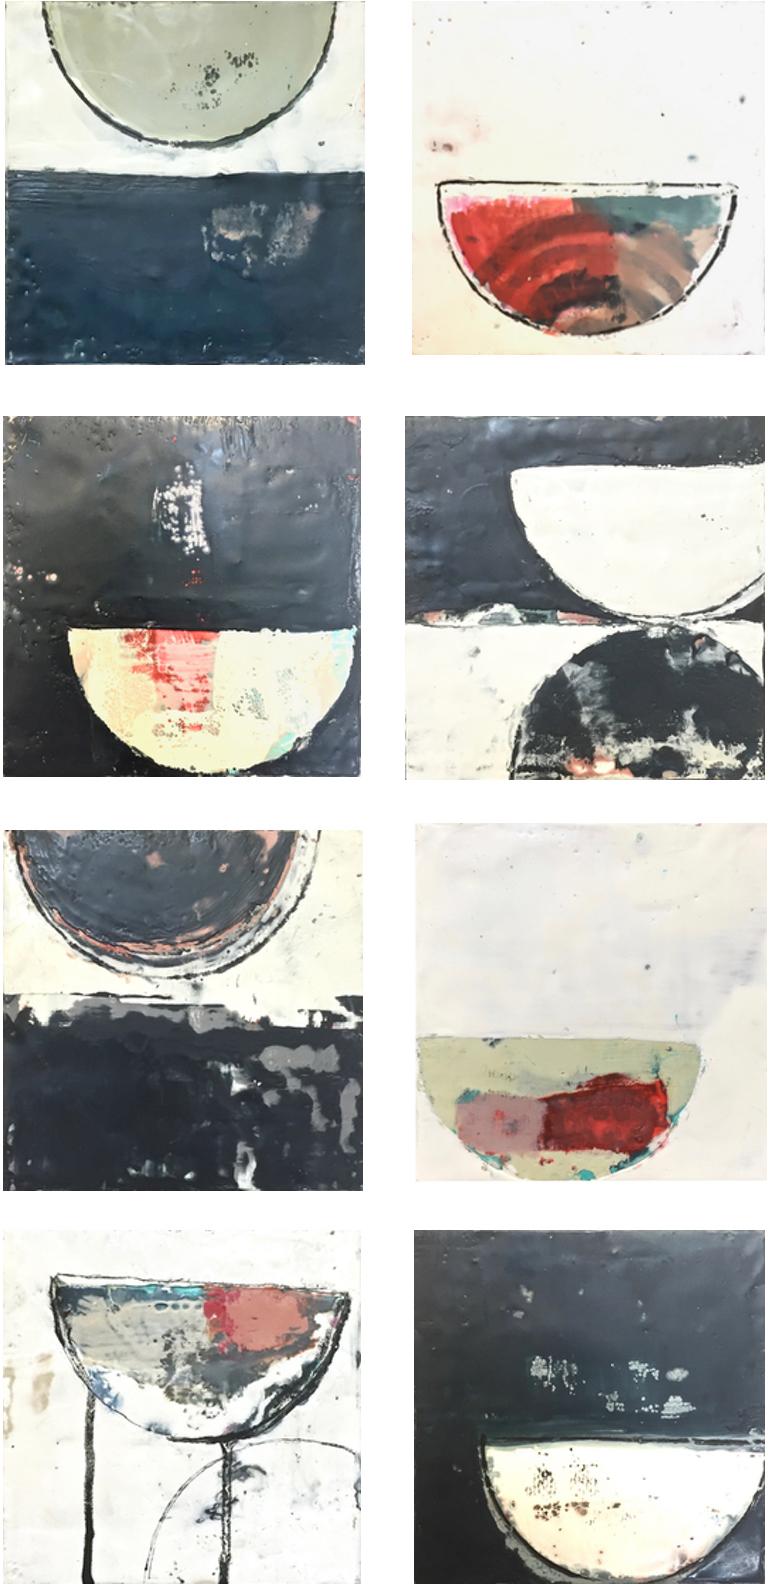 Marissa Voytenko Abstract Painting - "Rise" Eight abstract encaustic paintings in black, white and reds